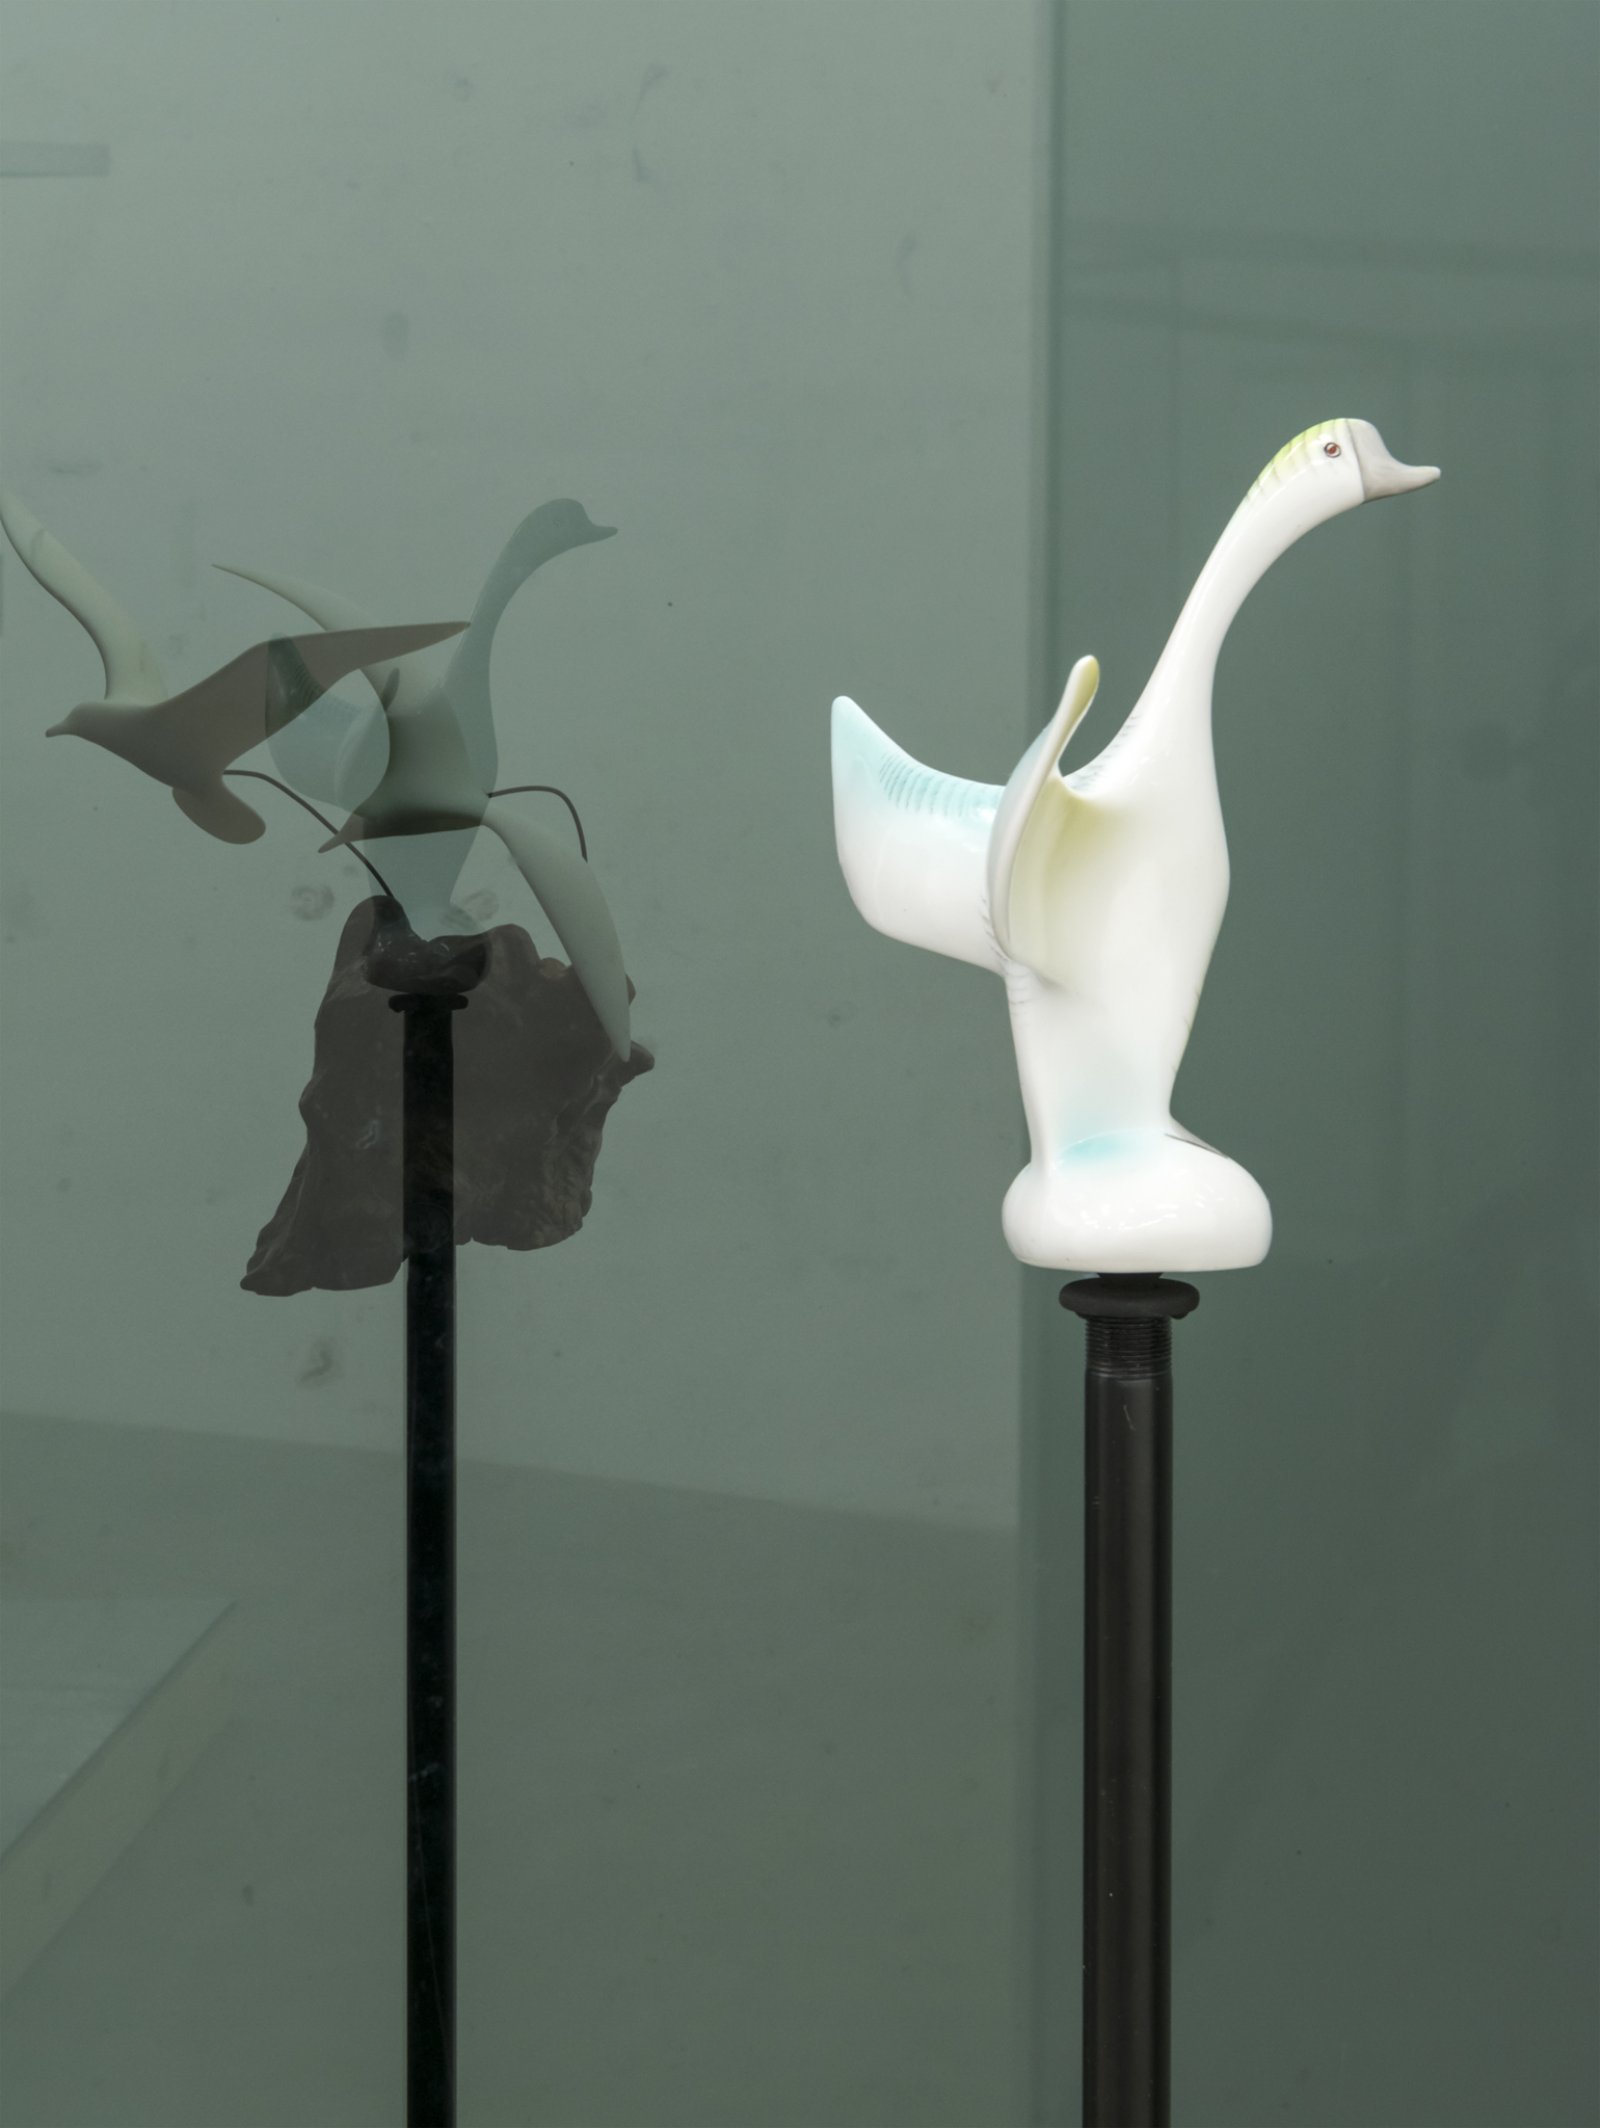 ​​Judy Radul, Connector Divider (Hawks, Sparrows, Pigeons, Doves, Ducks, Eagles) (detail), 2018, salvaged glass, aluminum, found ceramic figurines, microphone stands, dimensions variable​ by Judy Radul